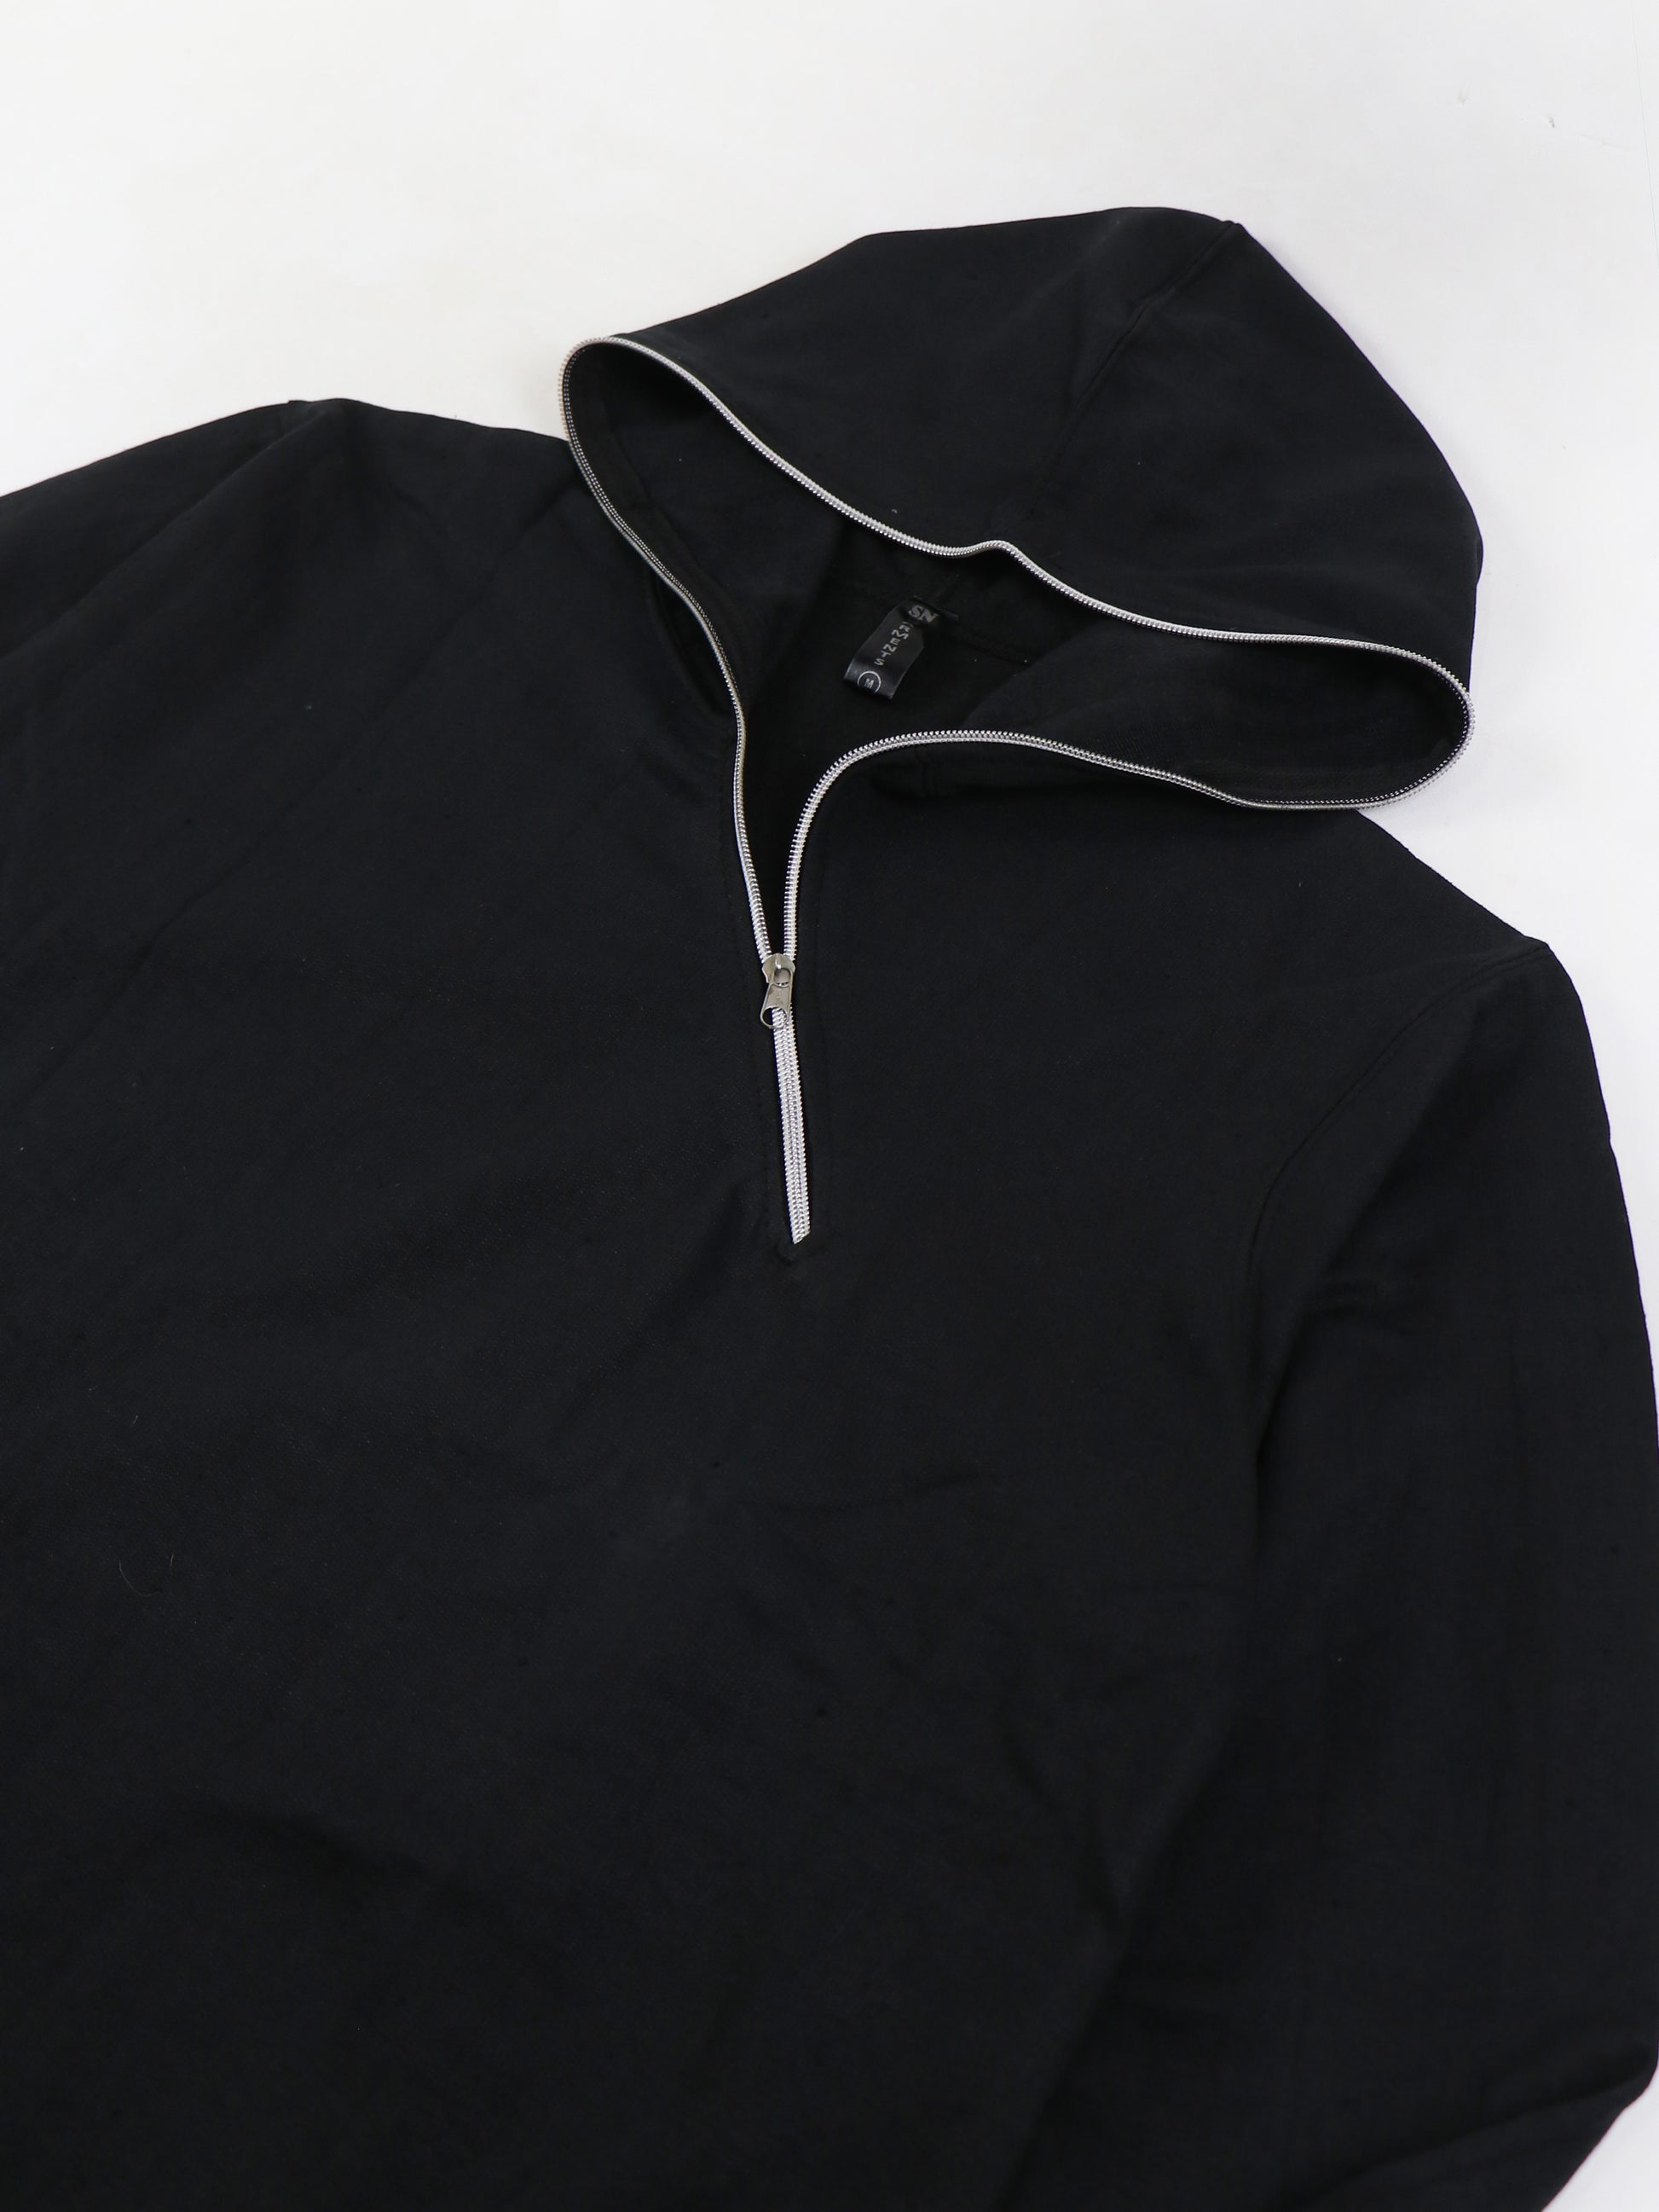 MH06 NS Unisex Pullover Hoodie Plain Black – The Cut Price